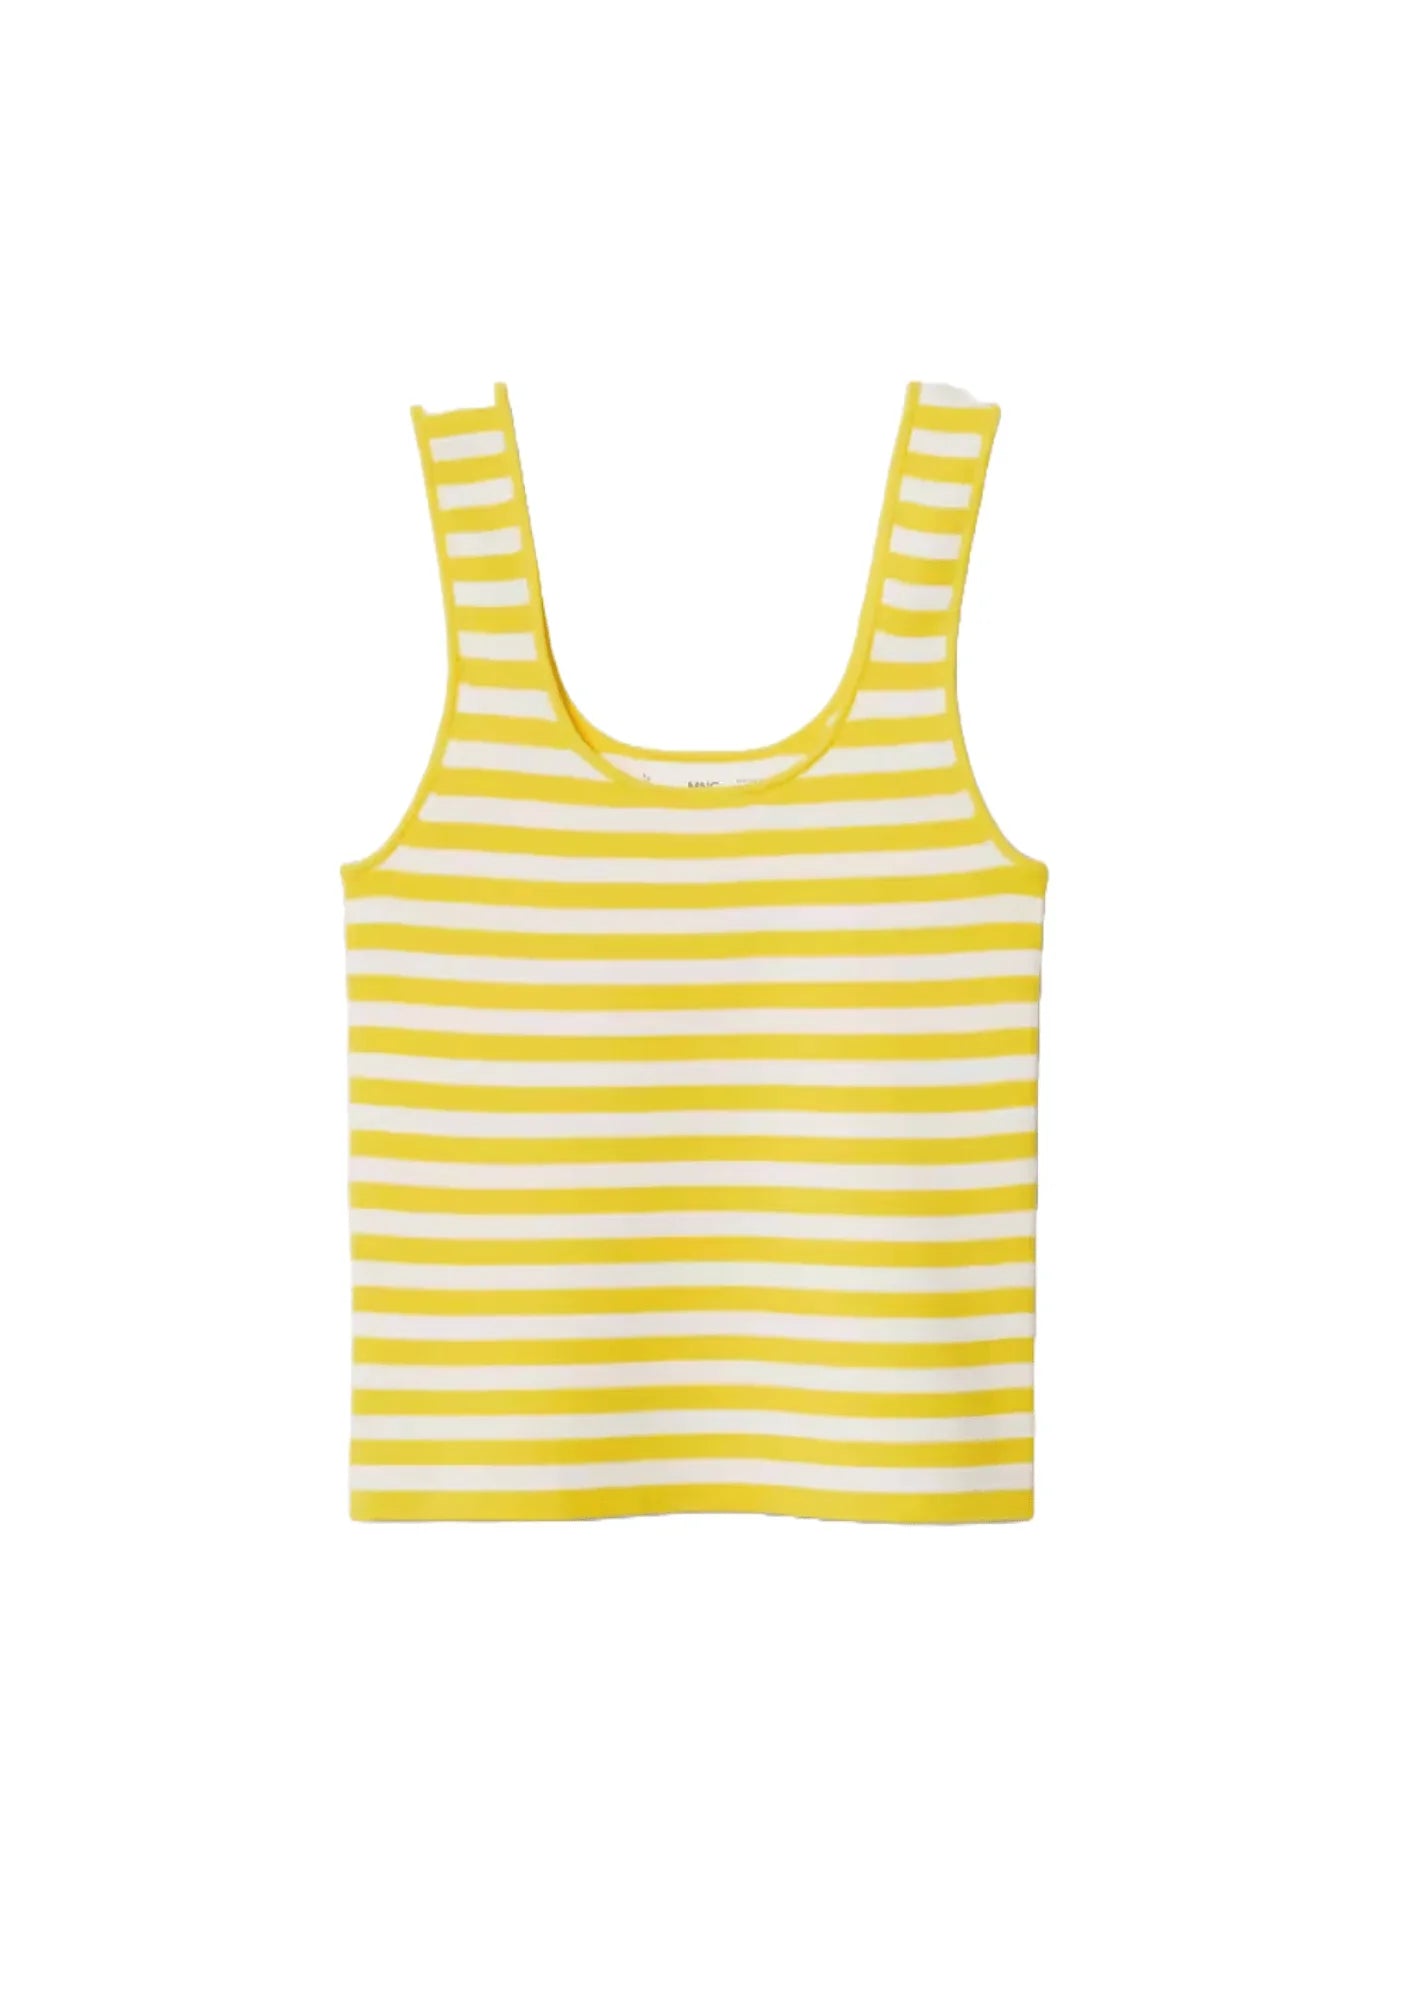 YELLOW STRIPED JERSEY TOP